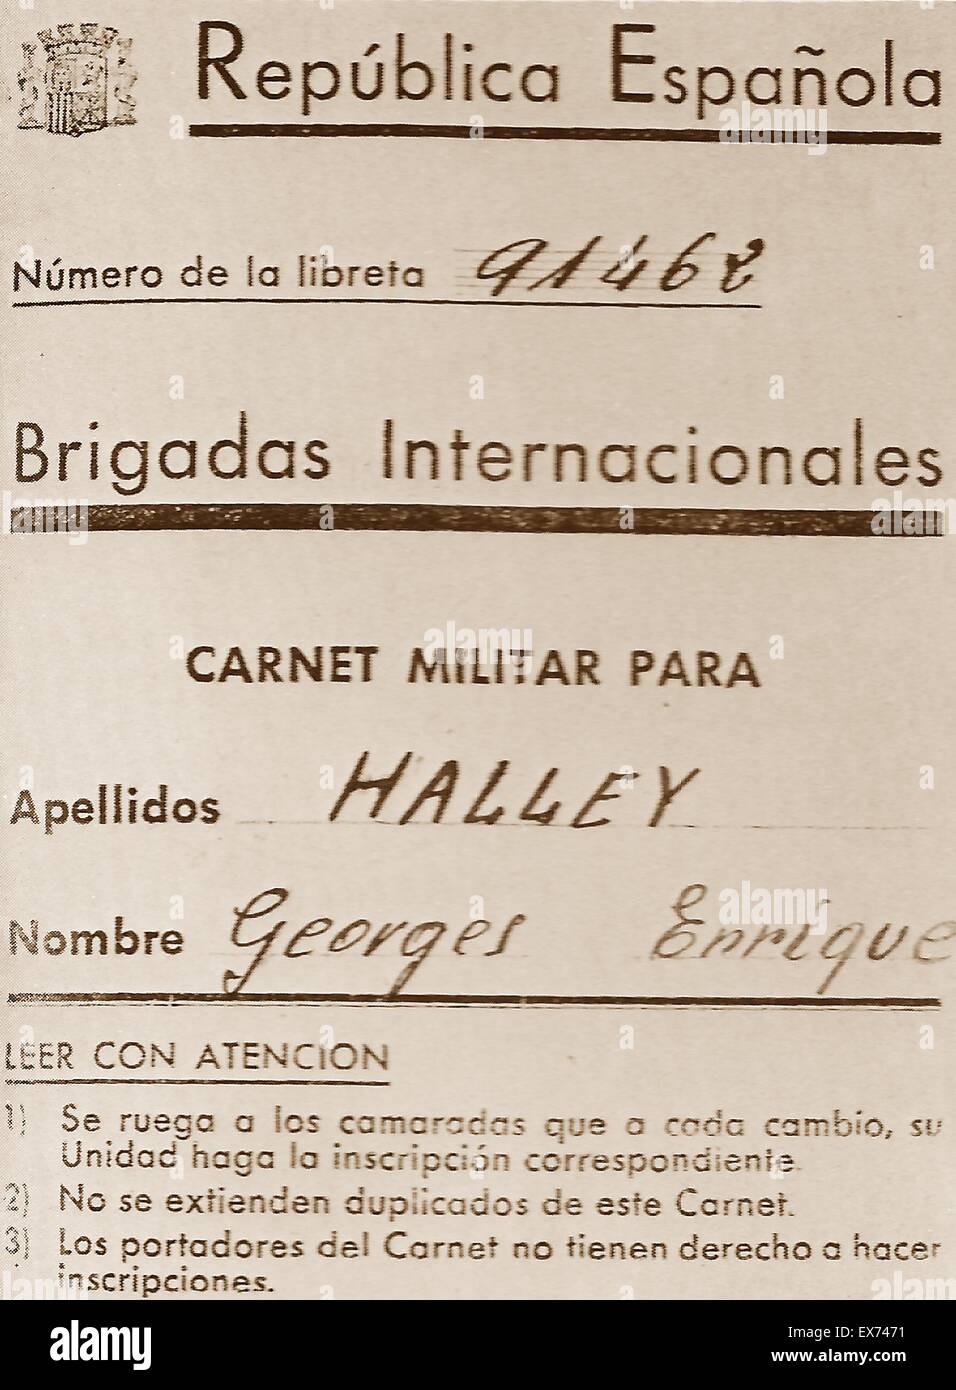 safe Conduct pass for International Brigade volunteer, George henry Halley, during the Spanish civil war Stock Photo